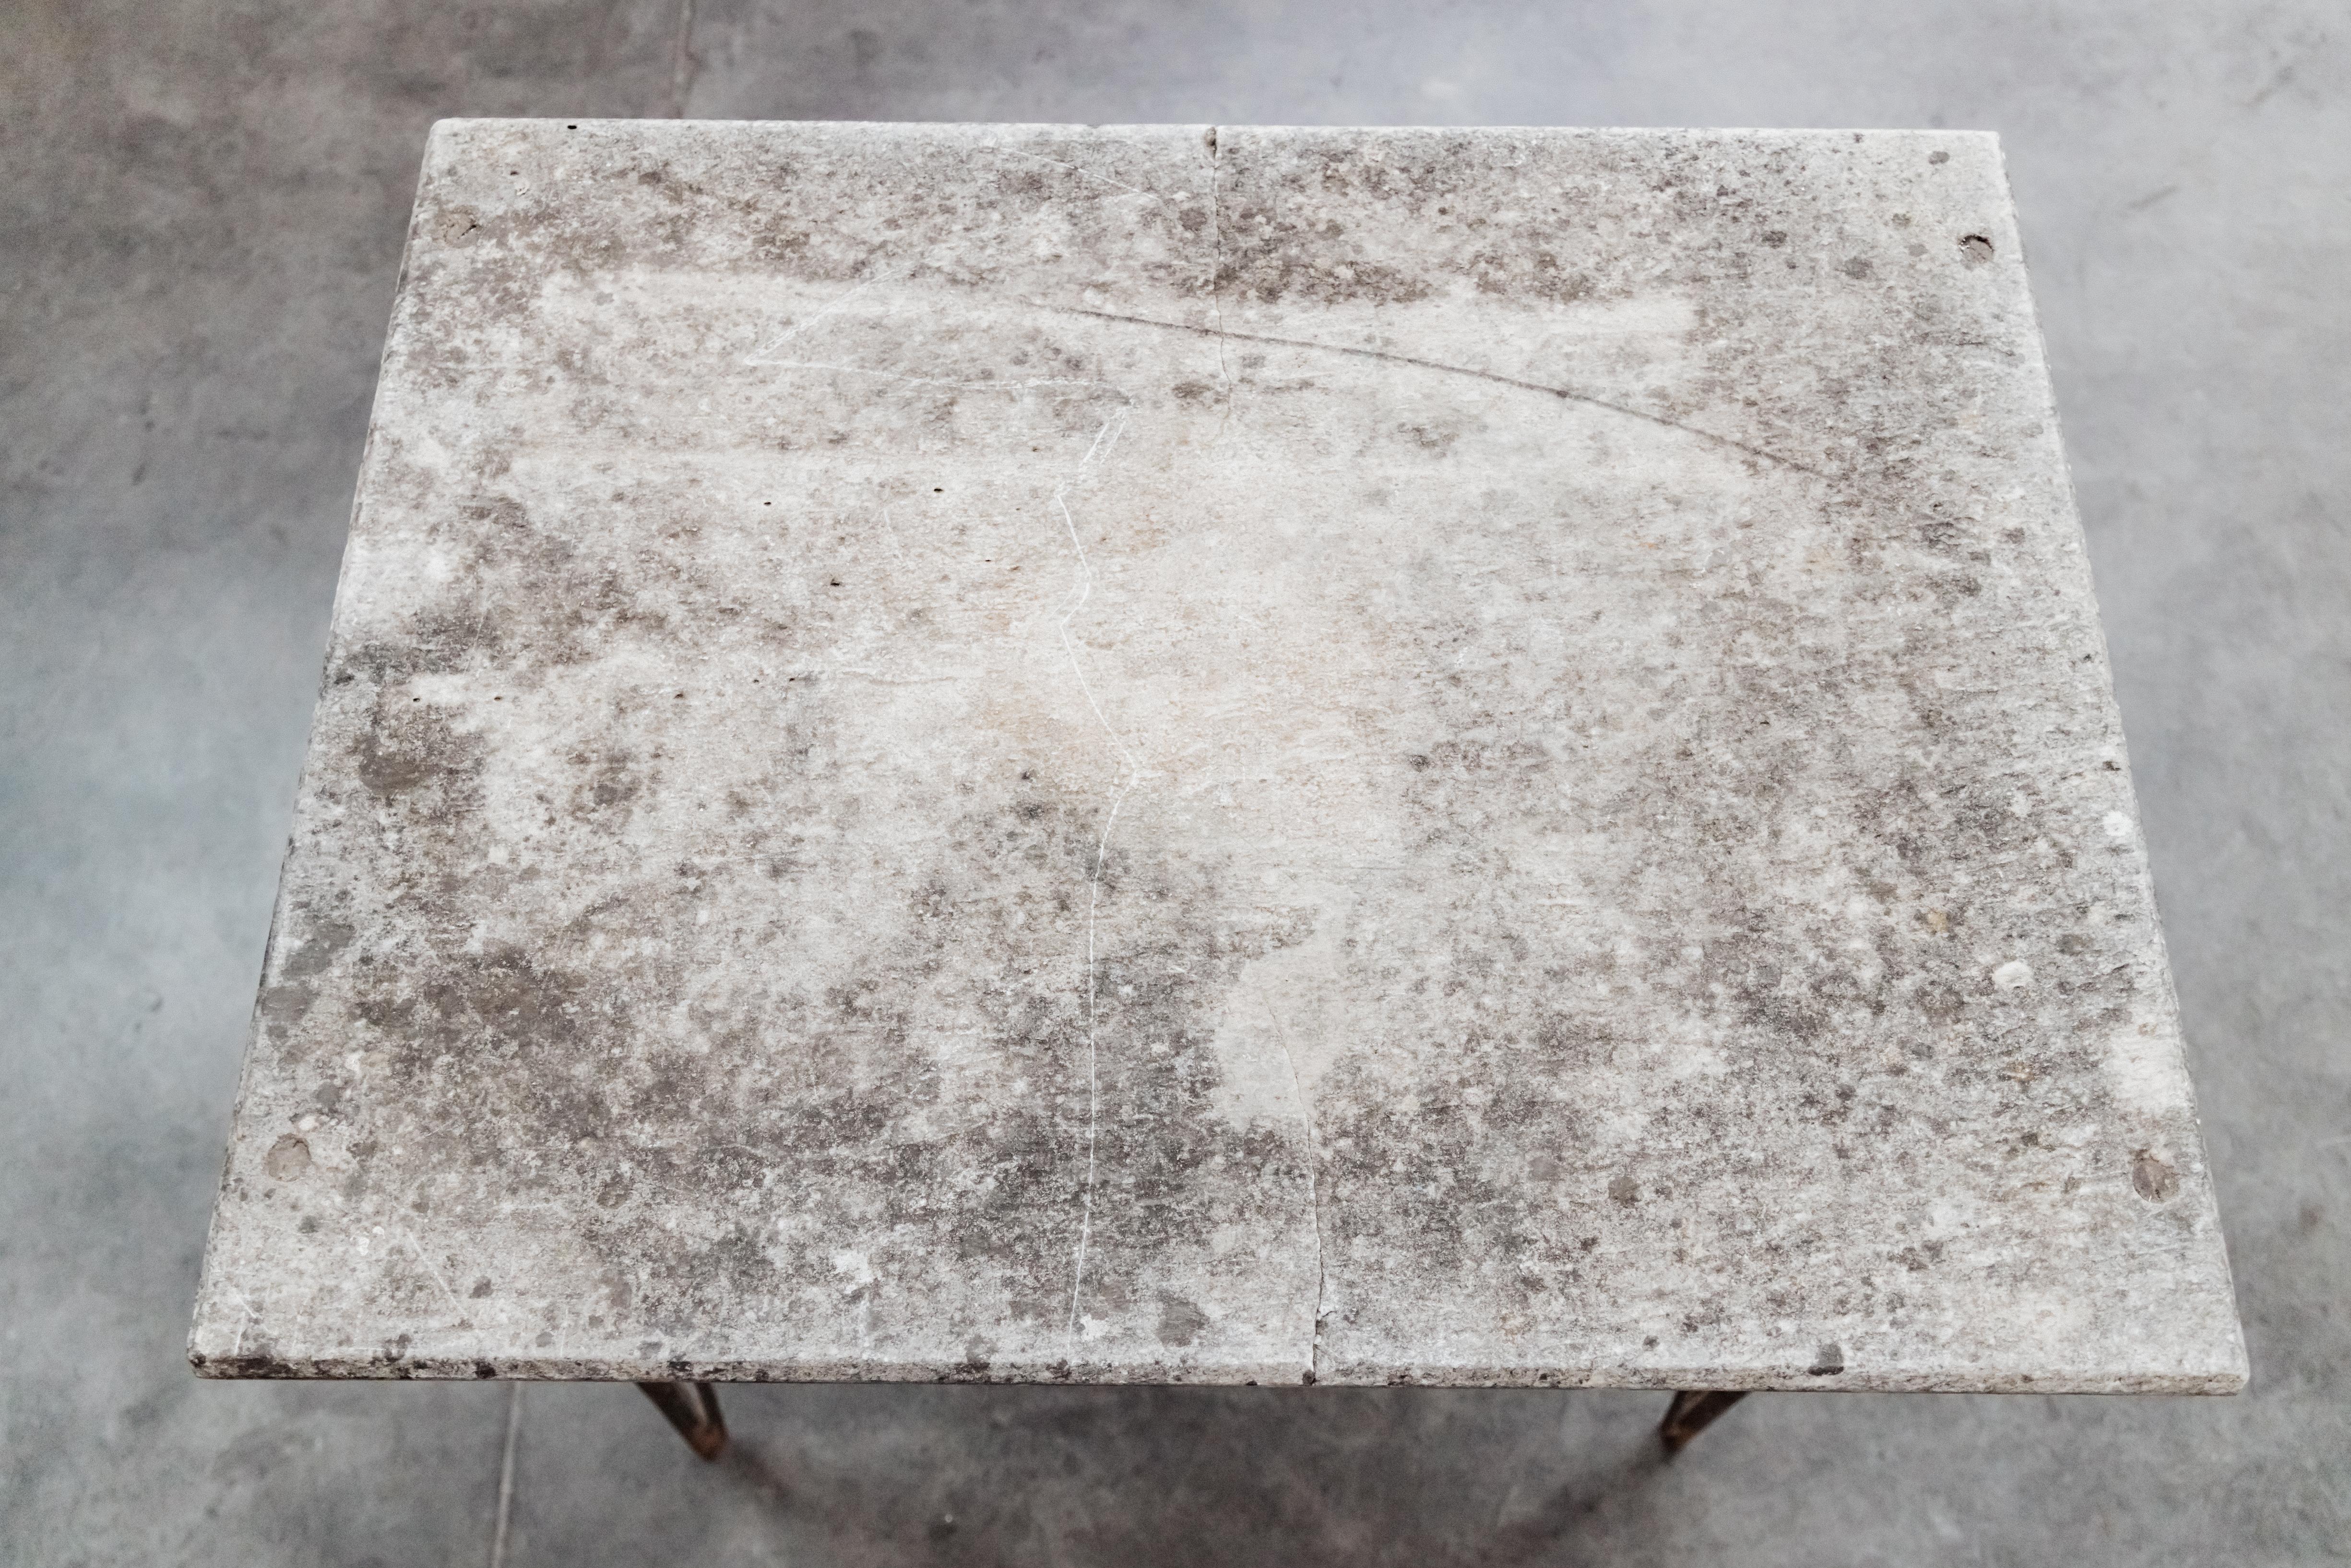 Vintage Concrete Garden Table From France, Circa 1940 For Sale 4